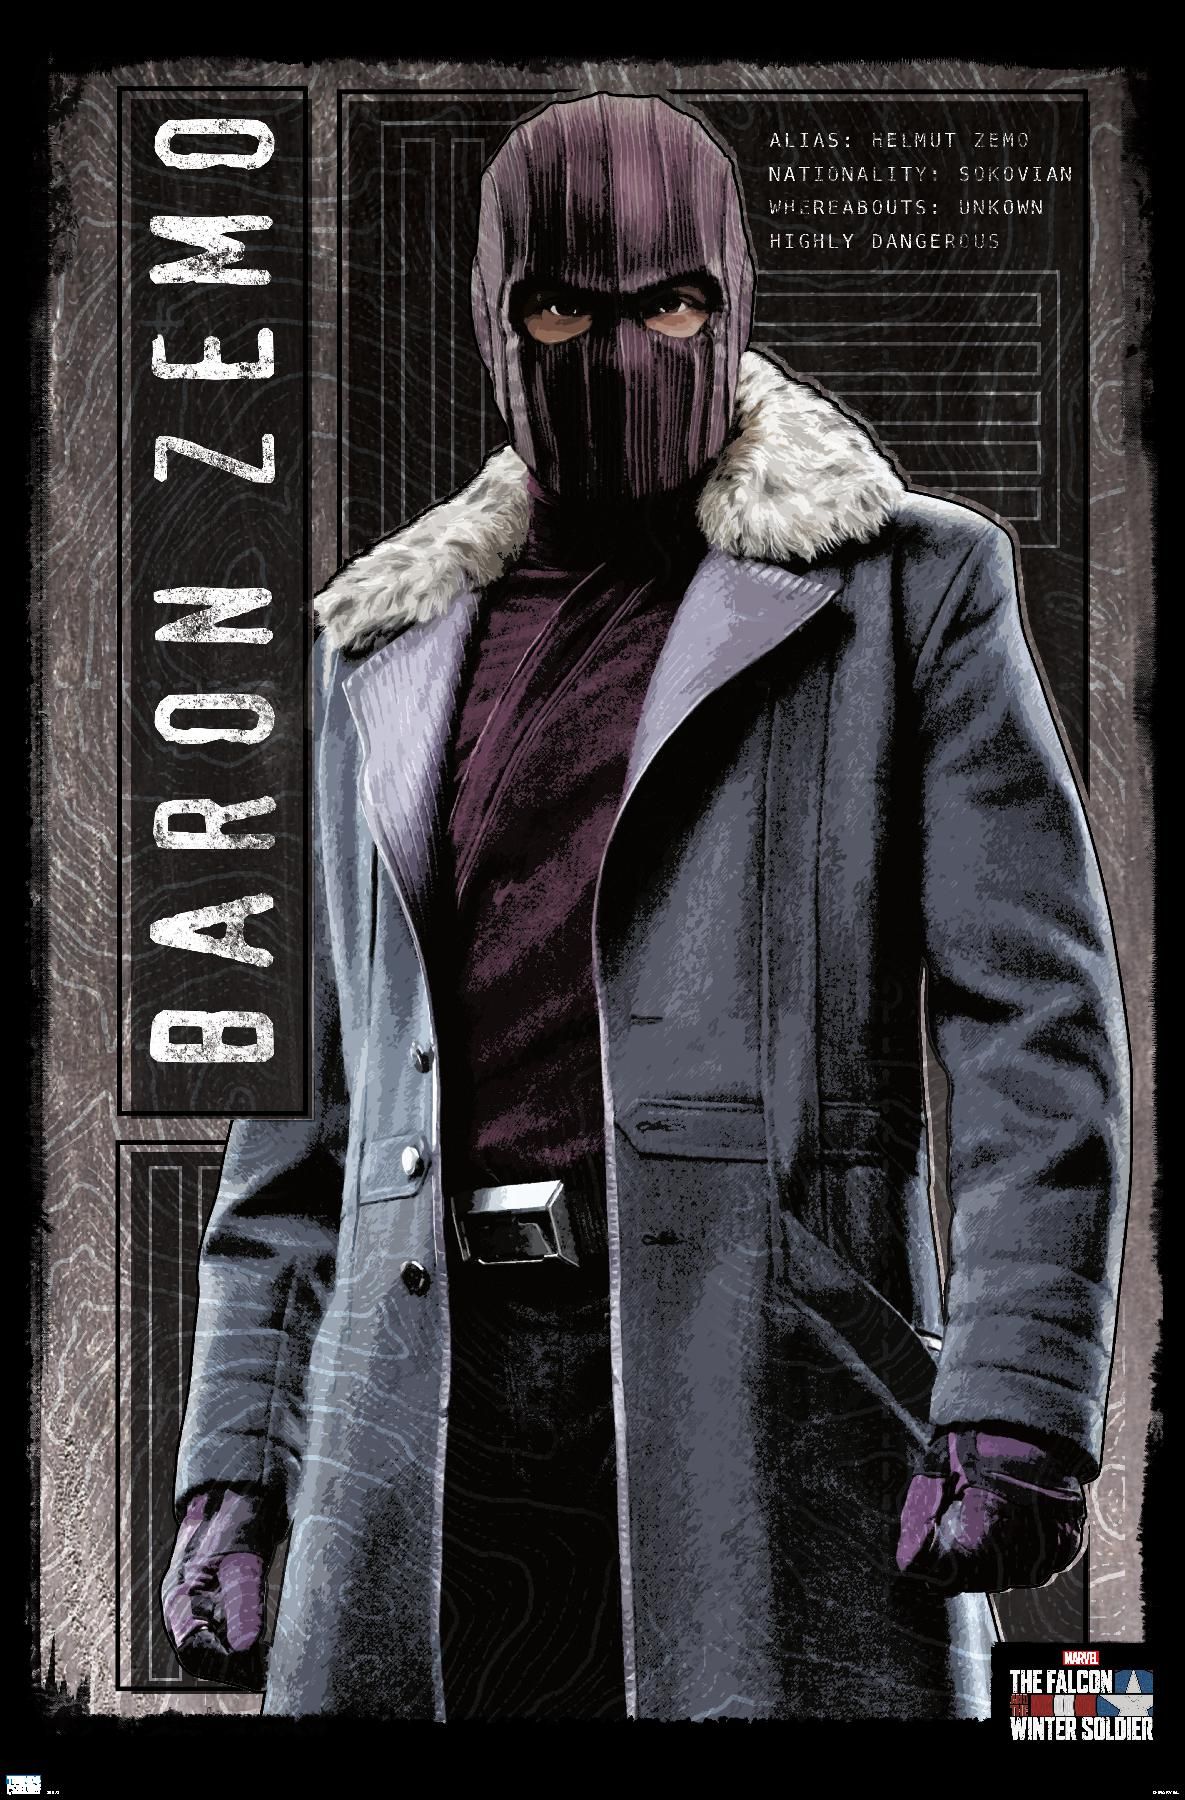 Marvel Television Falcon and Winter Soldier Zemo. Baron zemo, Falcon and winter soldier, Marvel